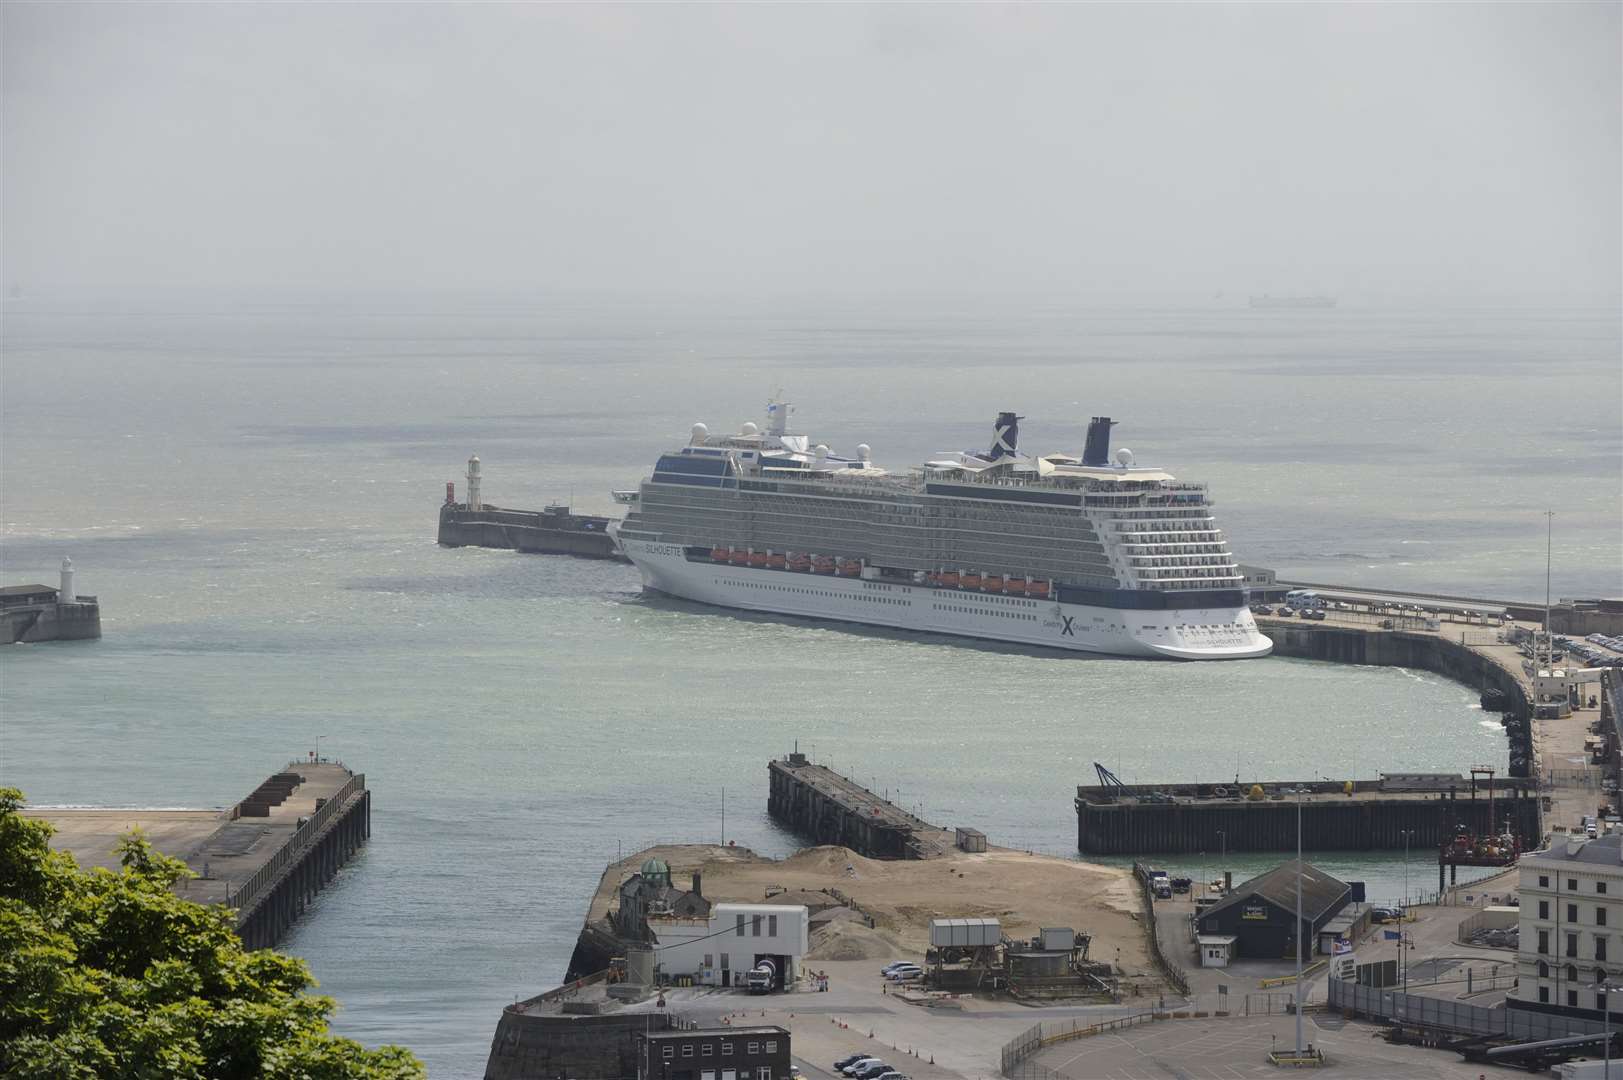 Dover Cruise Terminal will host Virgin Voyages' Scarlet Lady